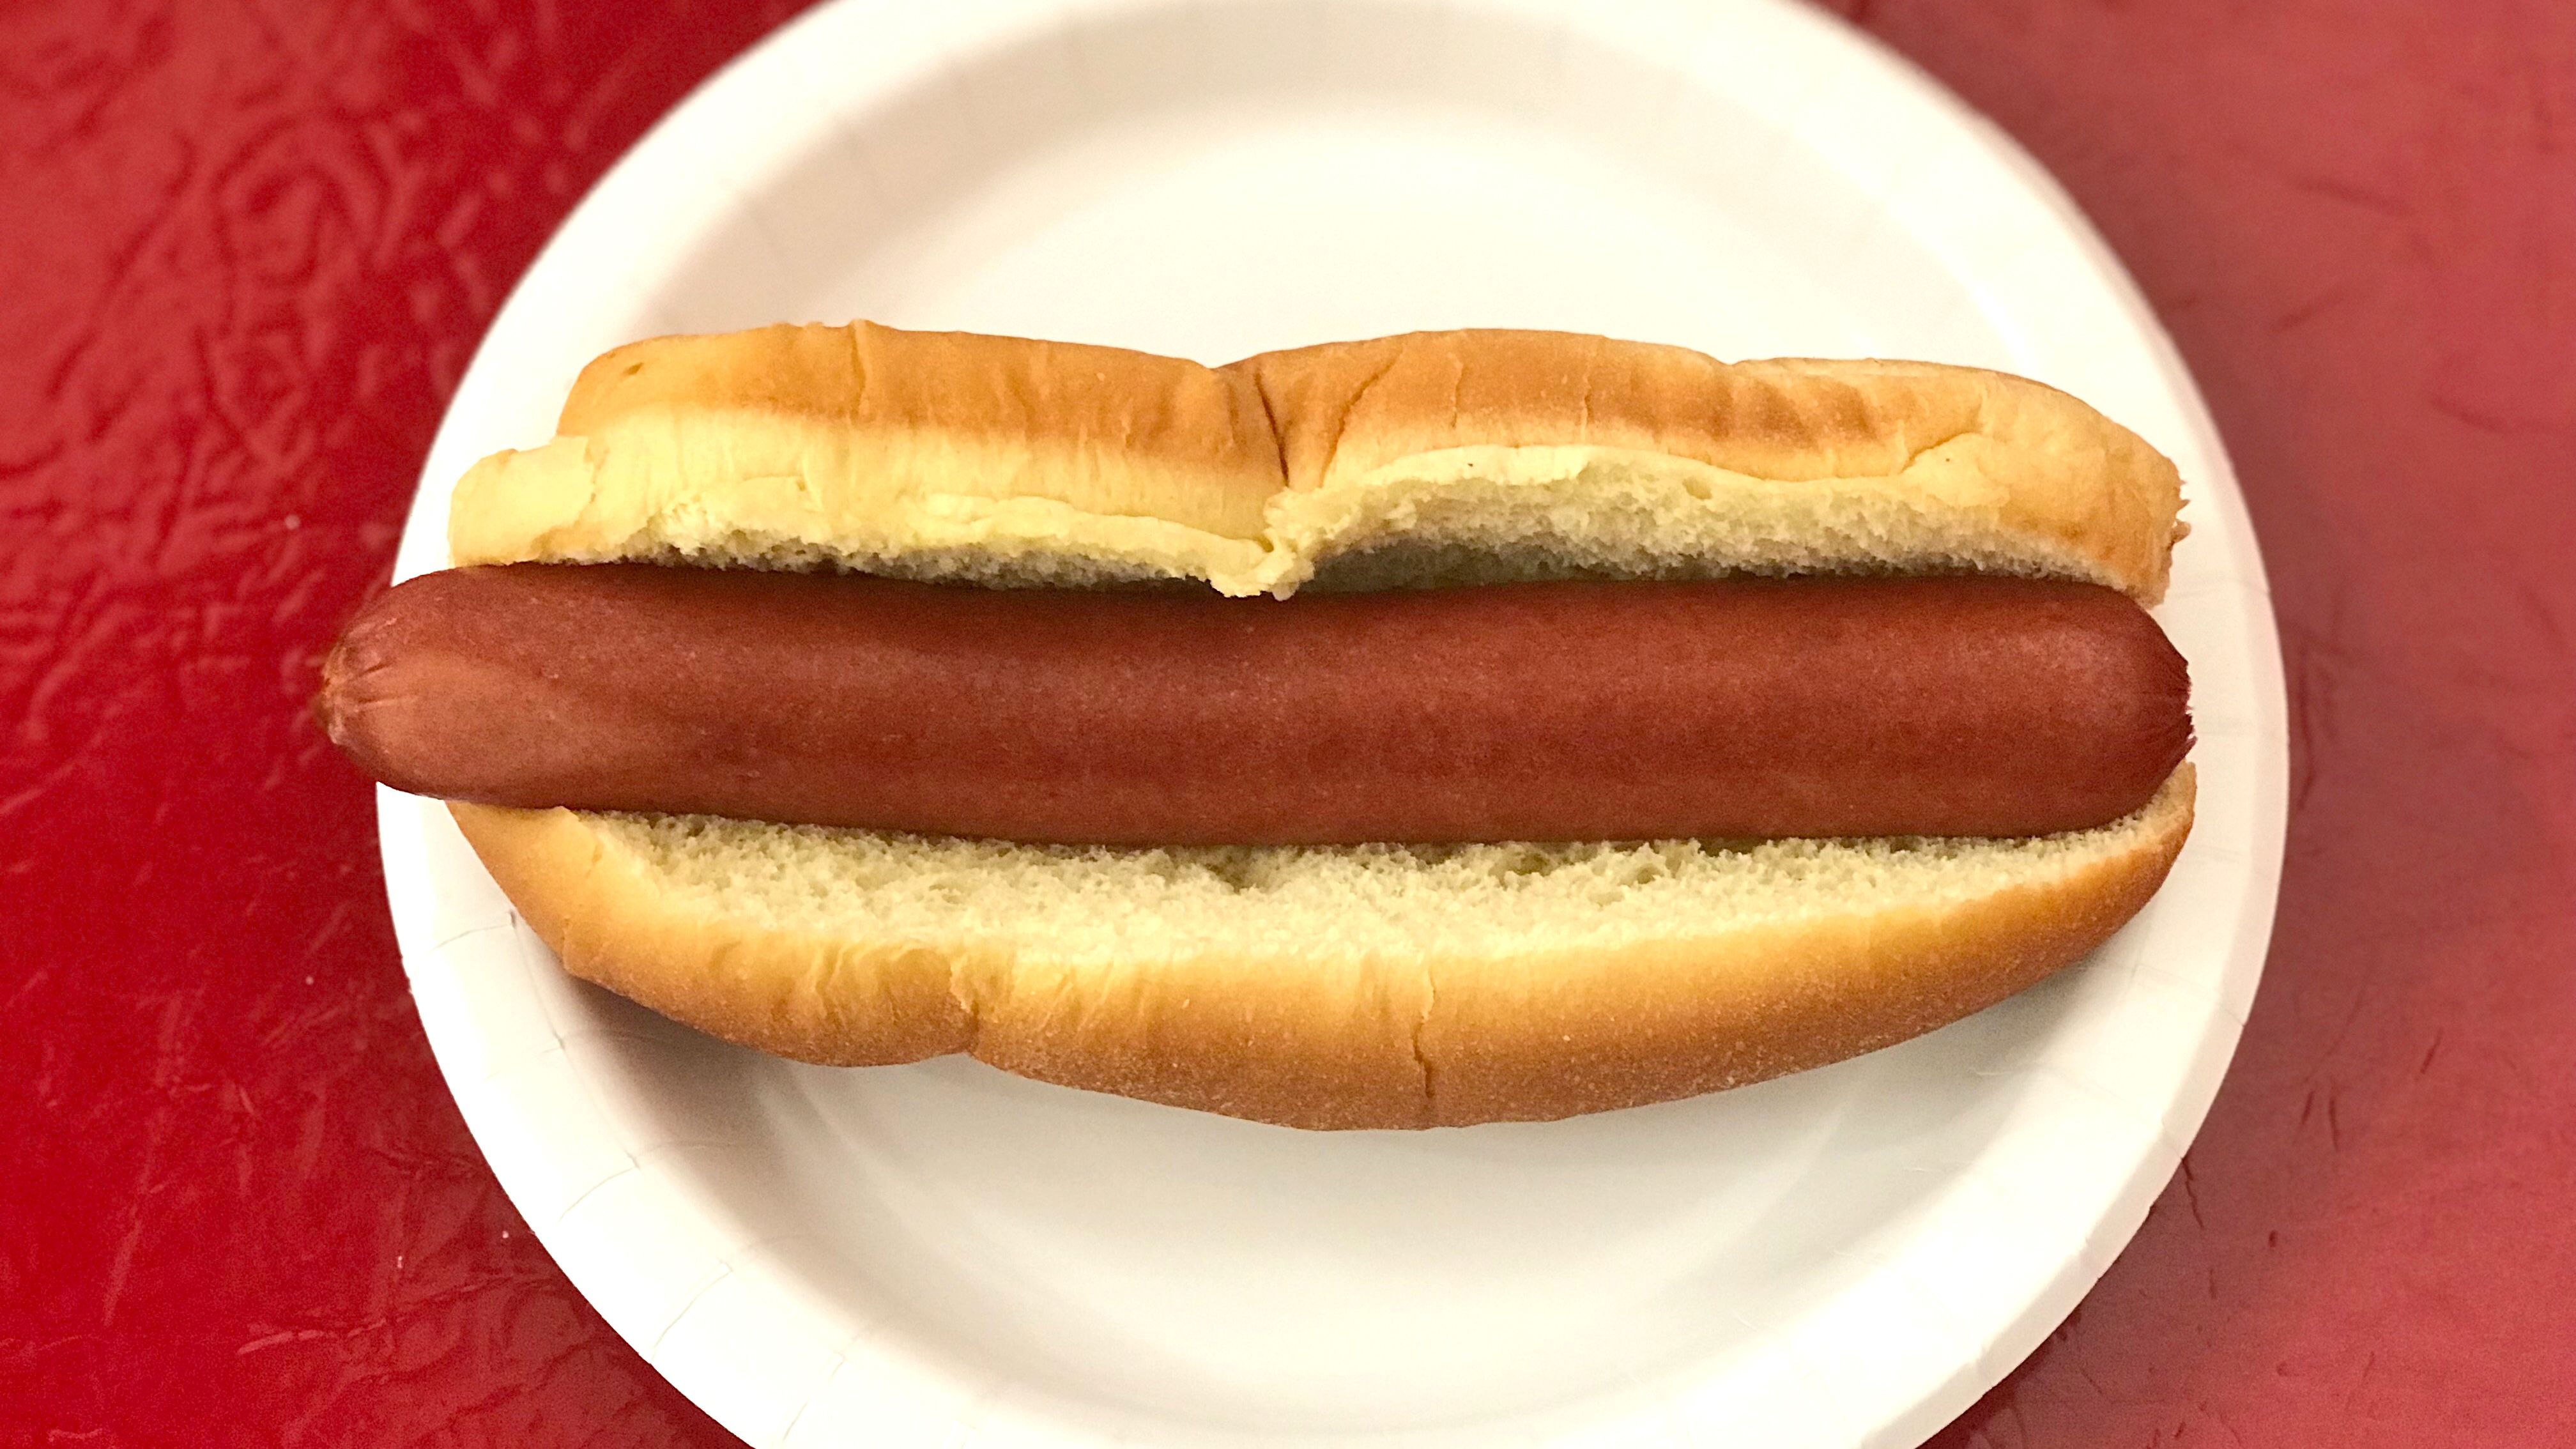 Costco's secret weapon: Food courts and $1.50 hot dogs